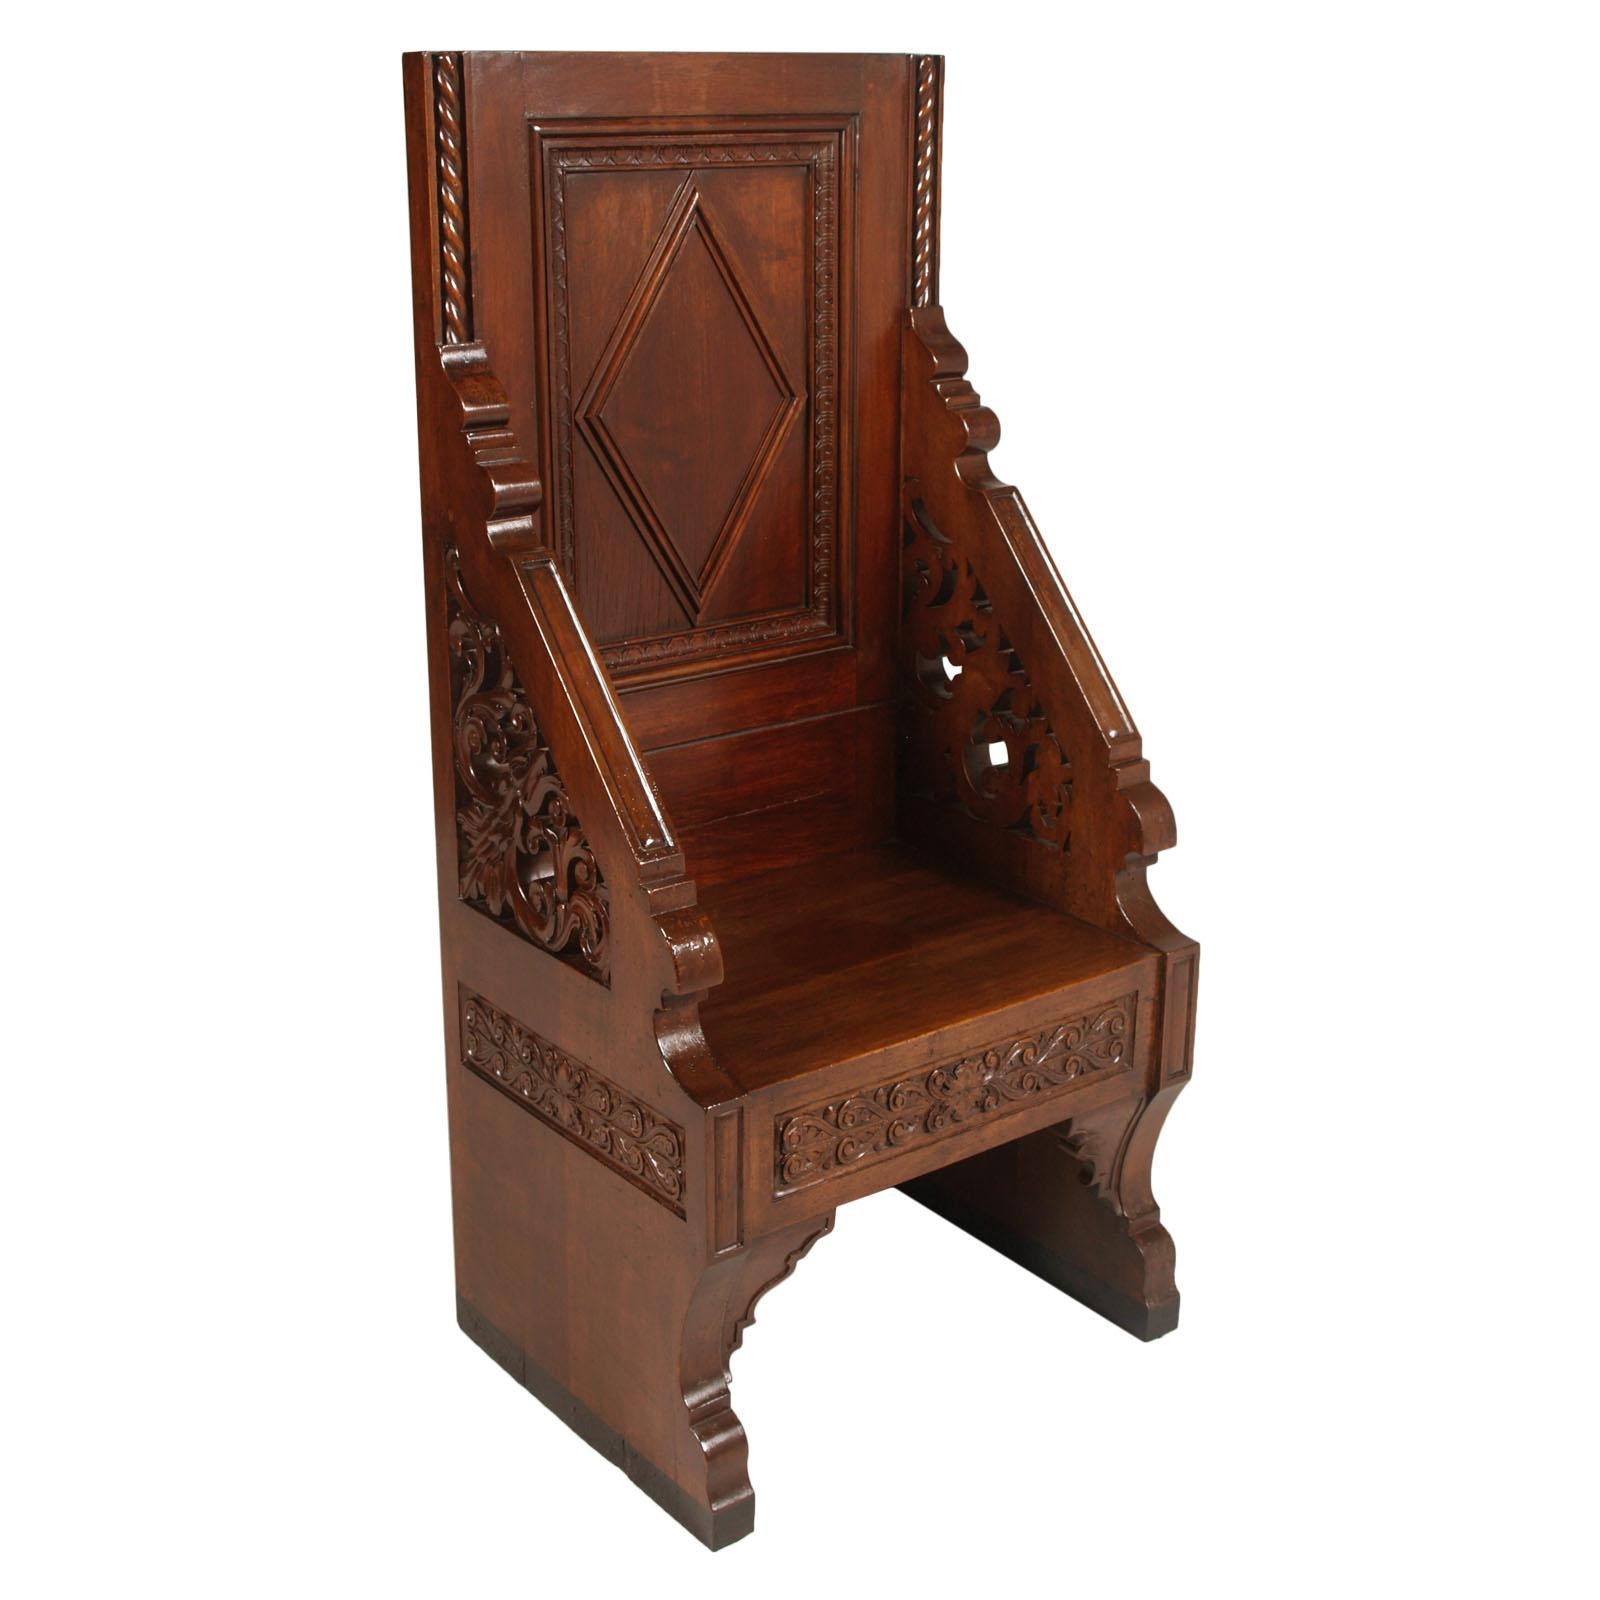 Antique Renaissance carved throne with decorative wood panels in solid hand-carved walnut, as well as the two crowns panels. The Throne with the two crowns have been restored and polished with wax.
This beautiful throne with crowns comes from the